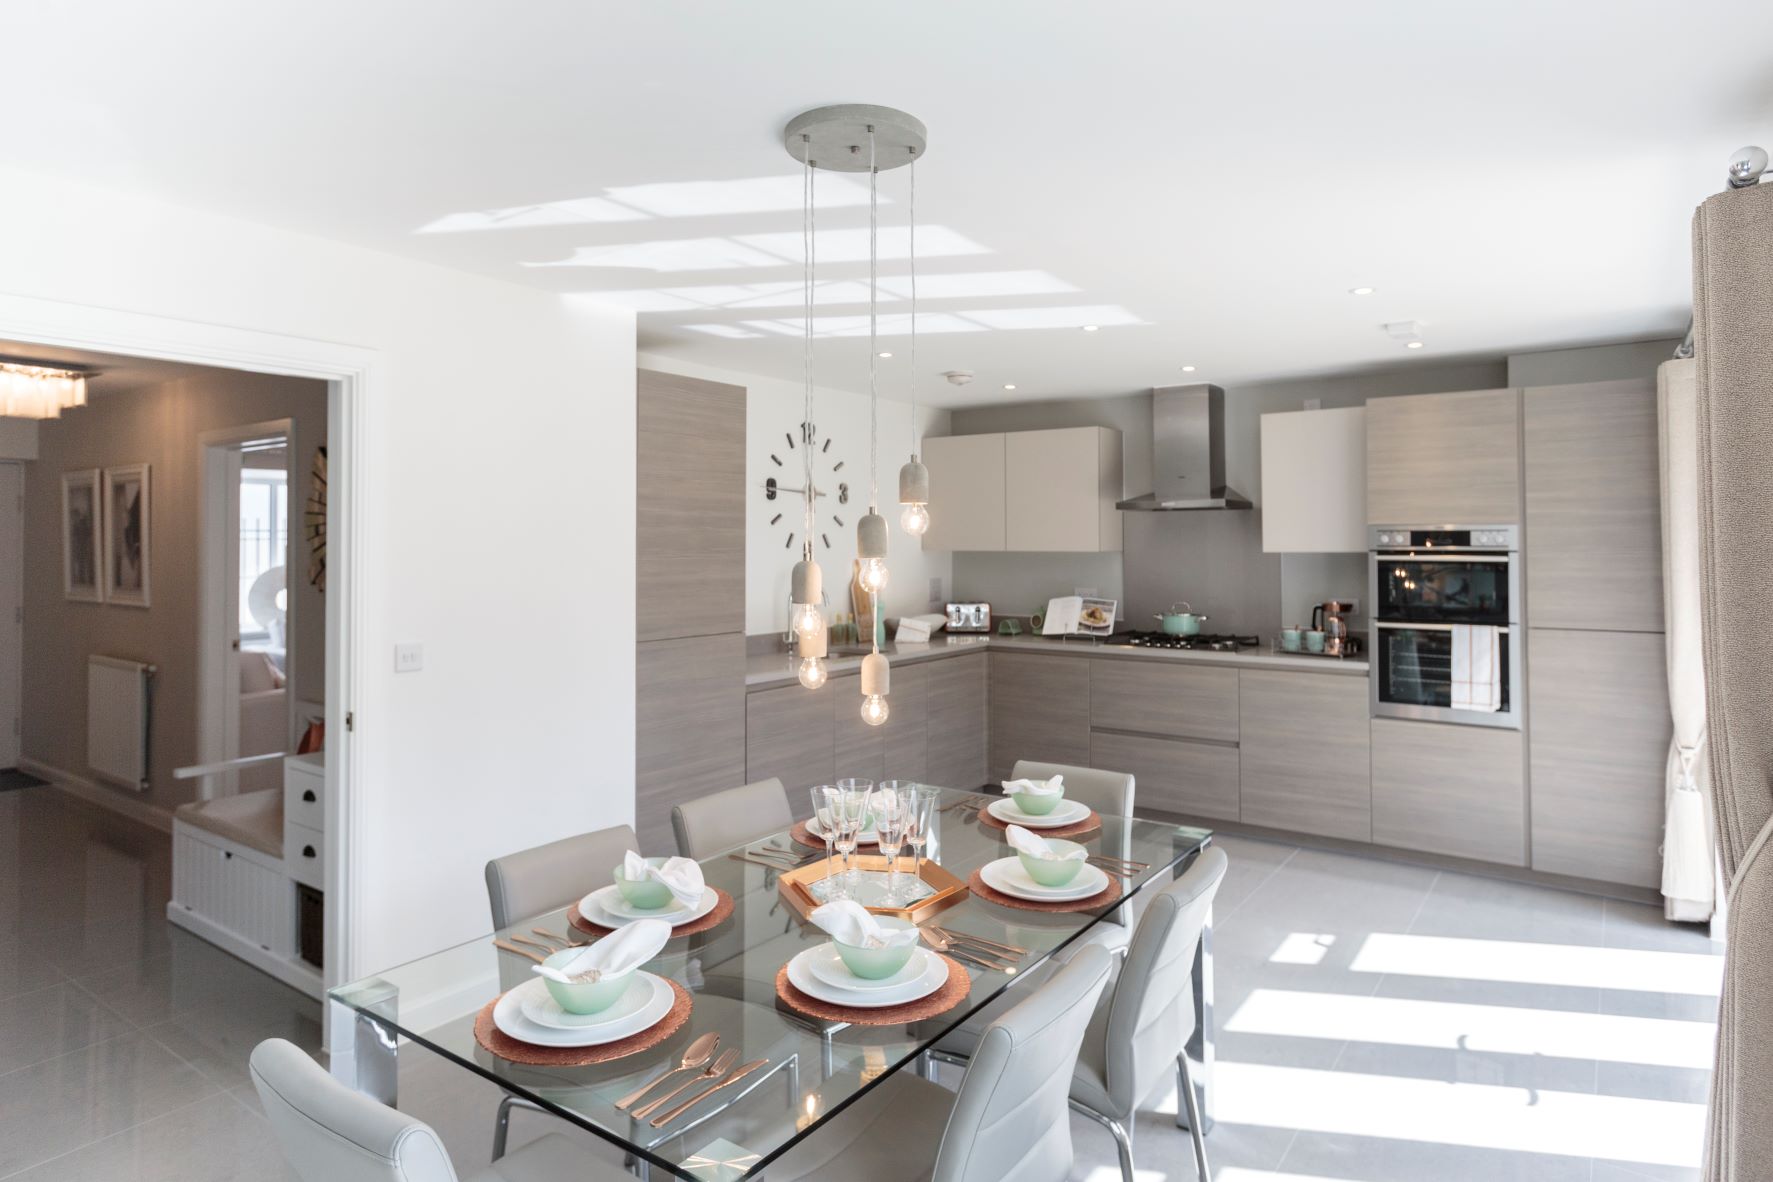 All Homes Sold at New Development in Rochford